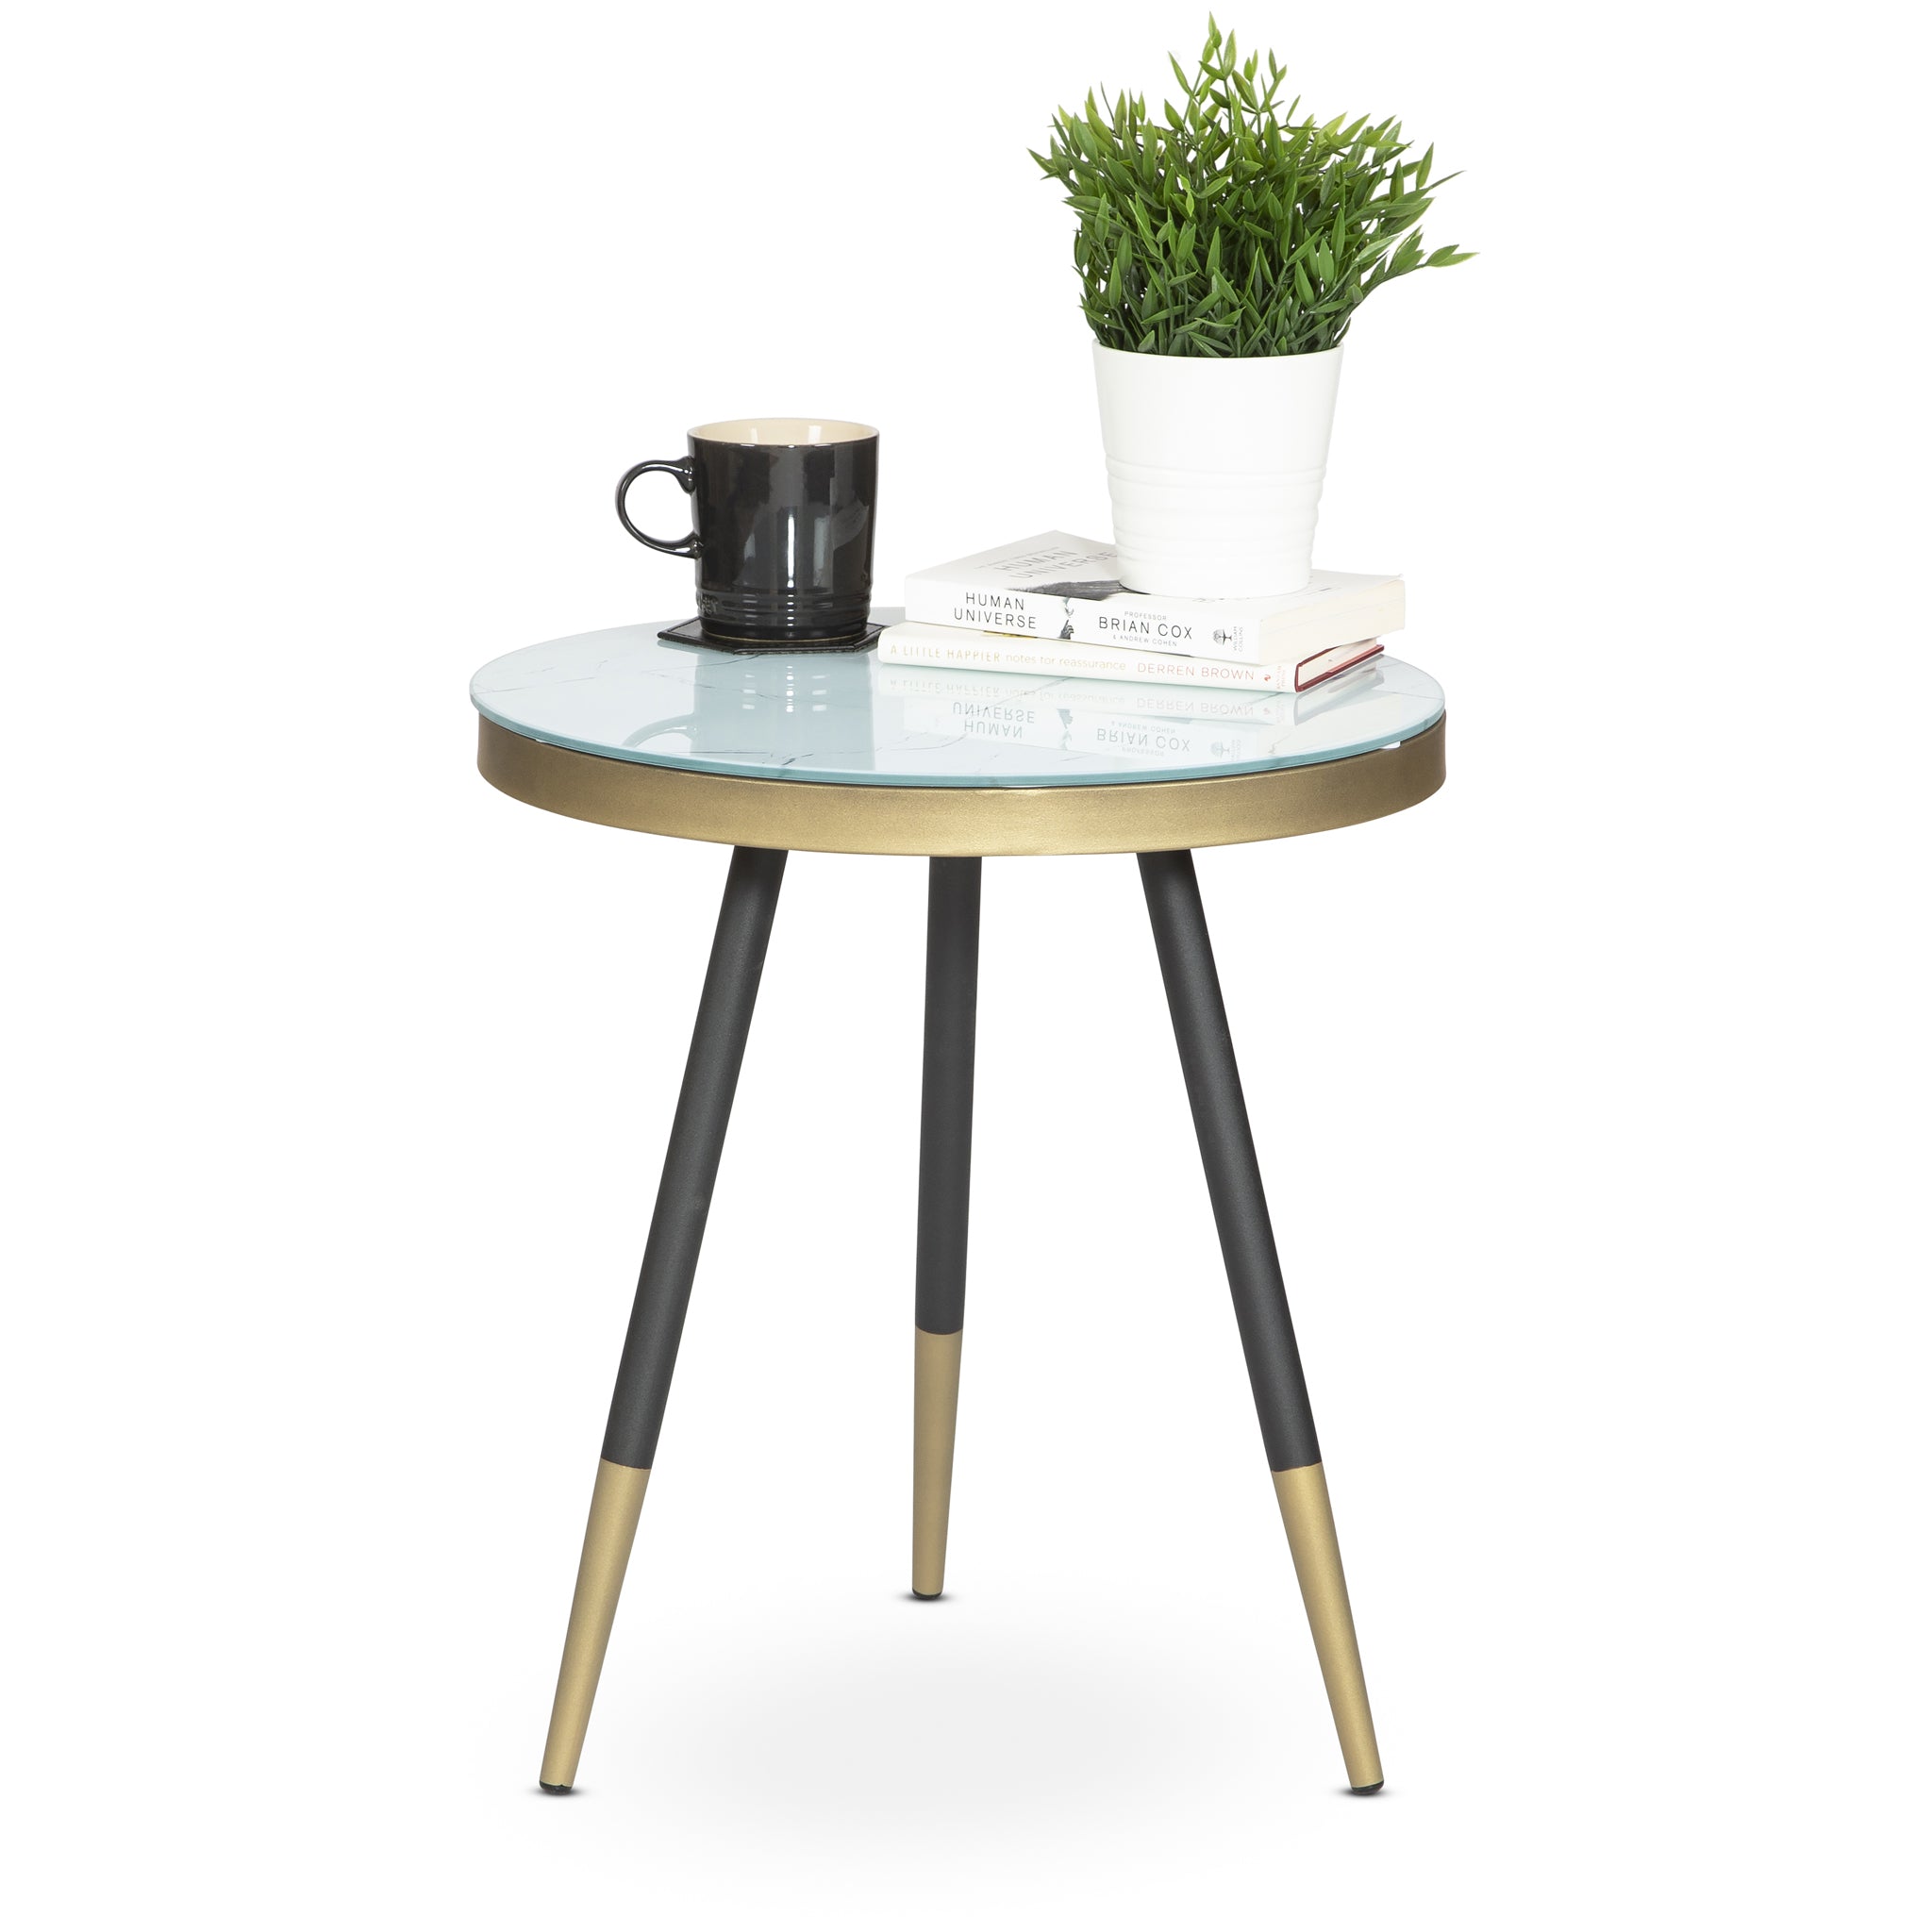 Marble Effect Side Table With Wooden Legs - 45 x 50cm